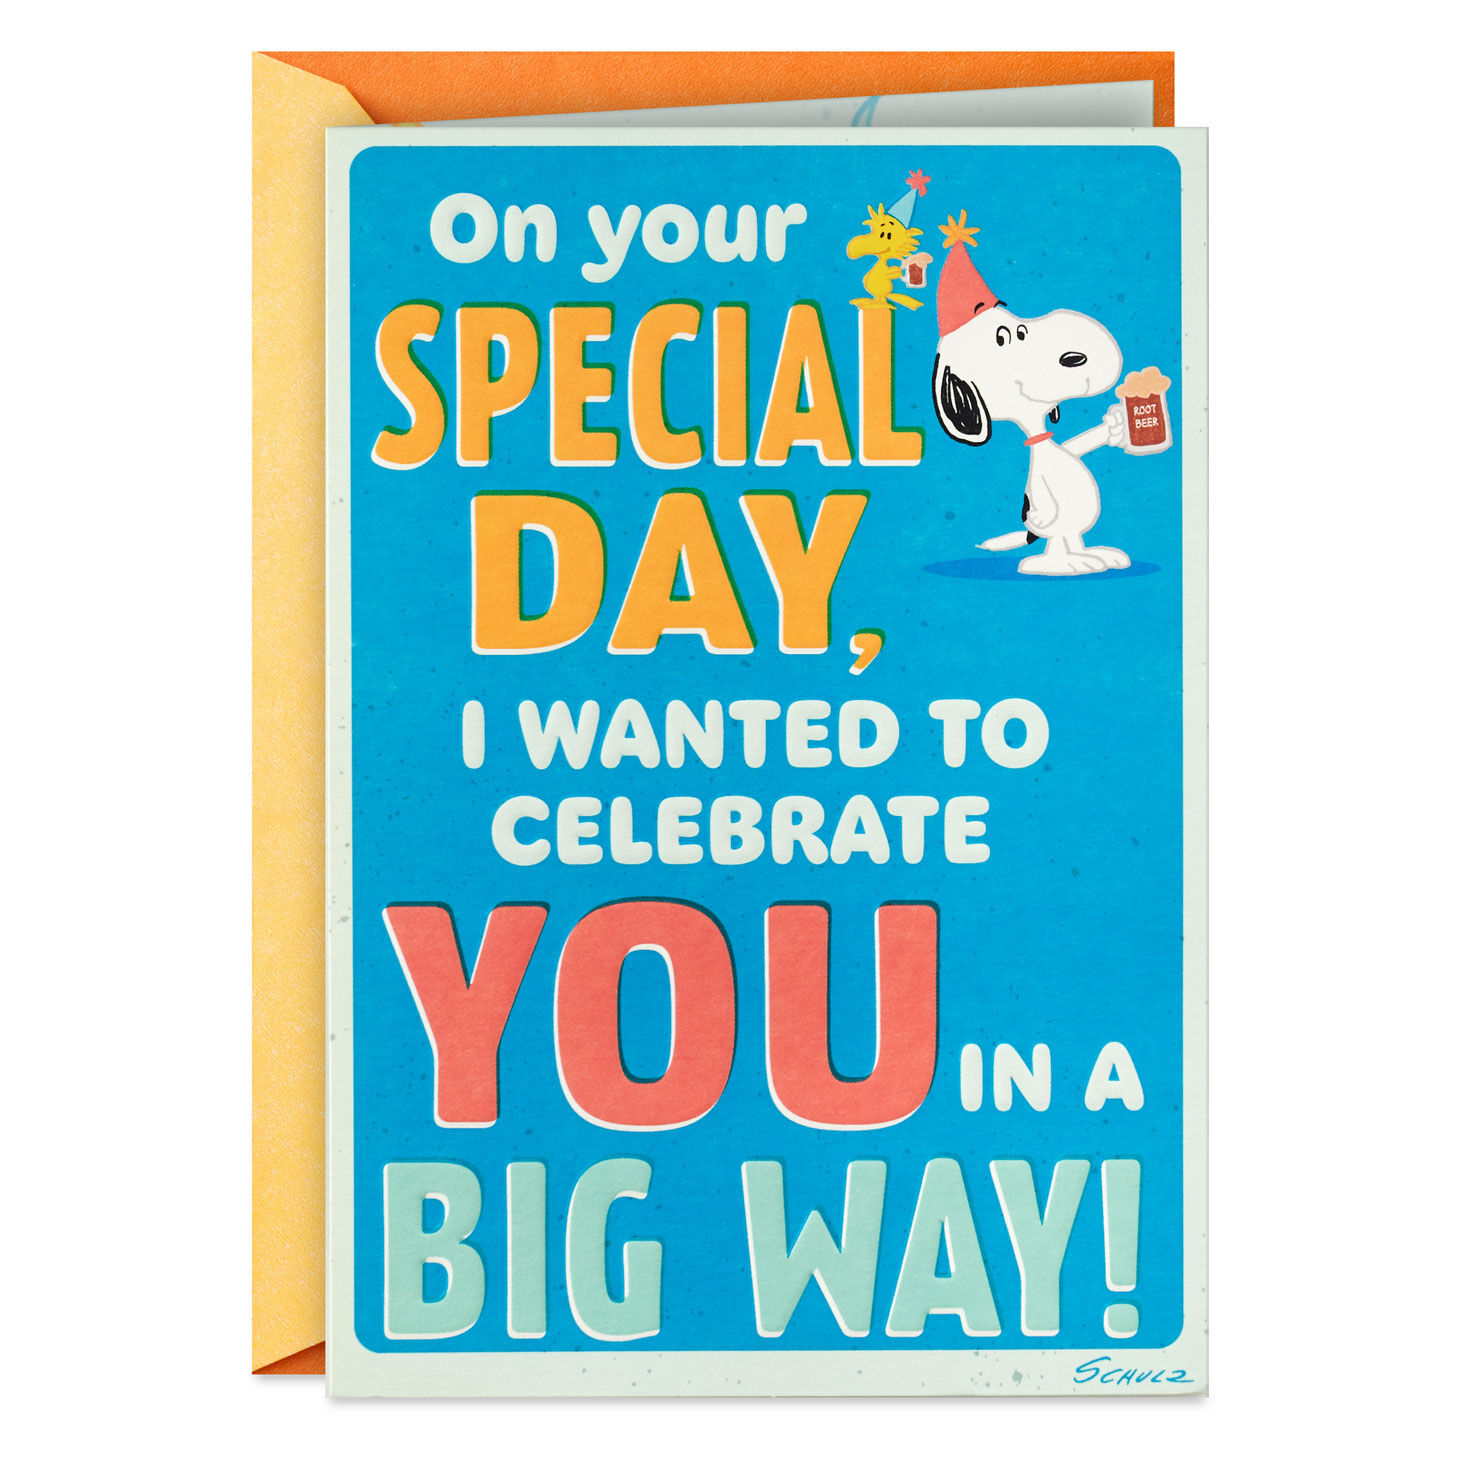 Peanuts Snoopy and Woodstock Burpday Banner Funny Birthday Card for only USD 5.59 | Hallmark